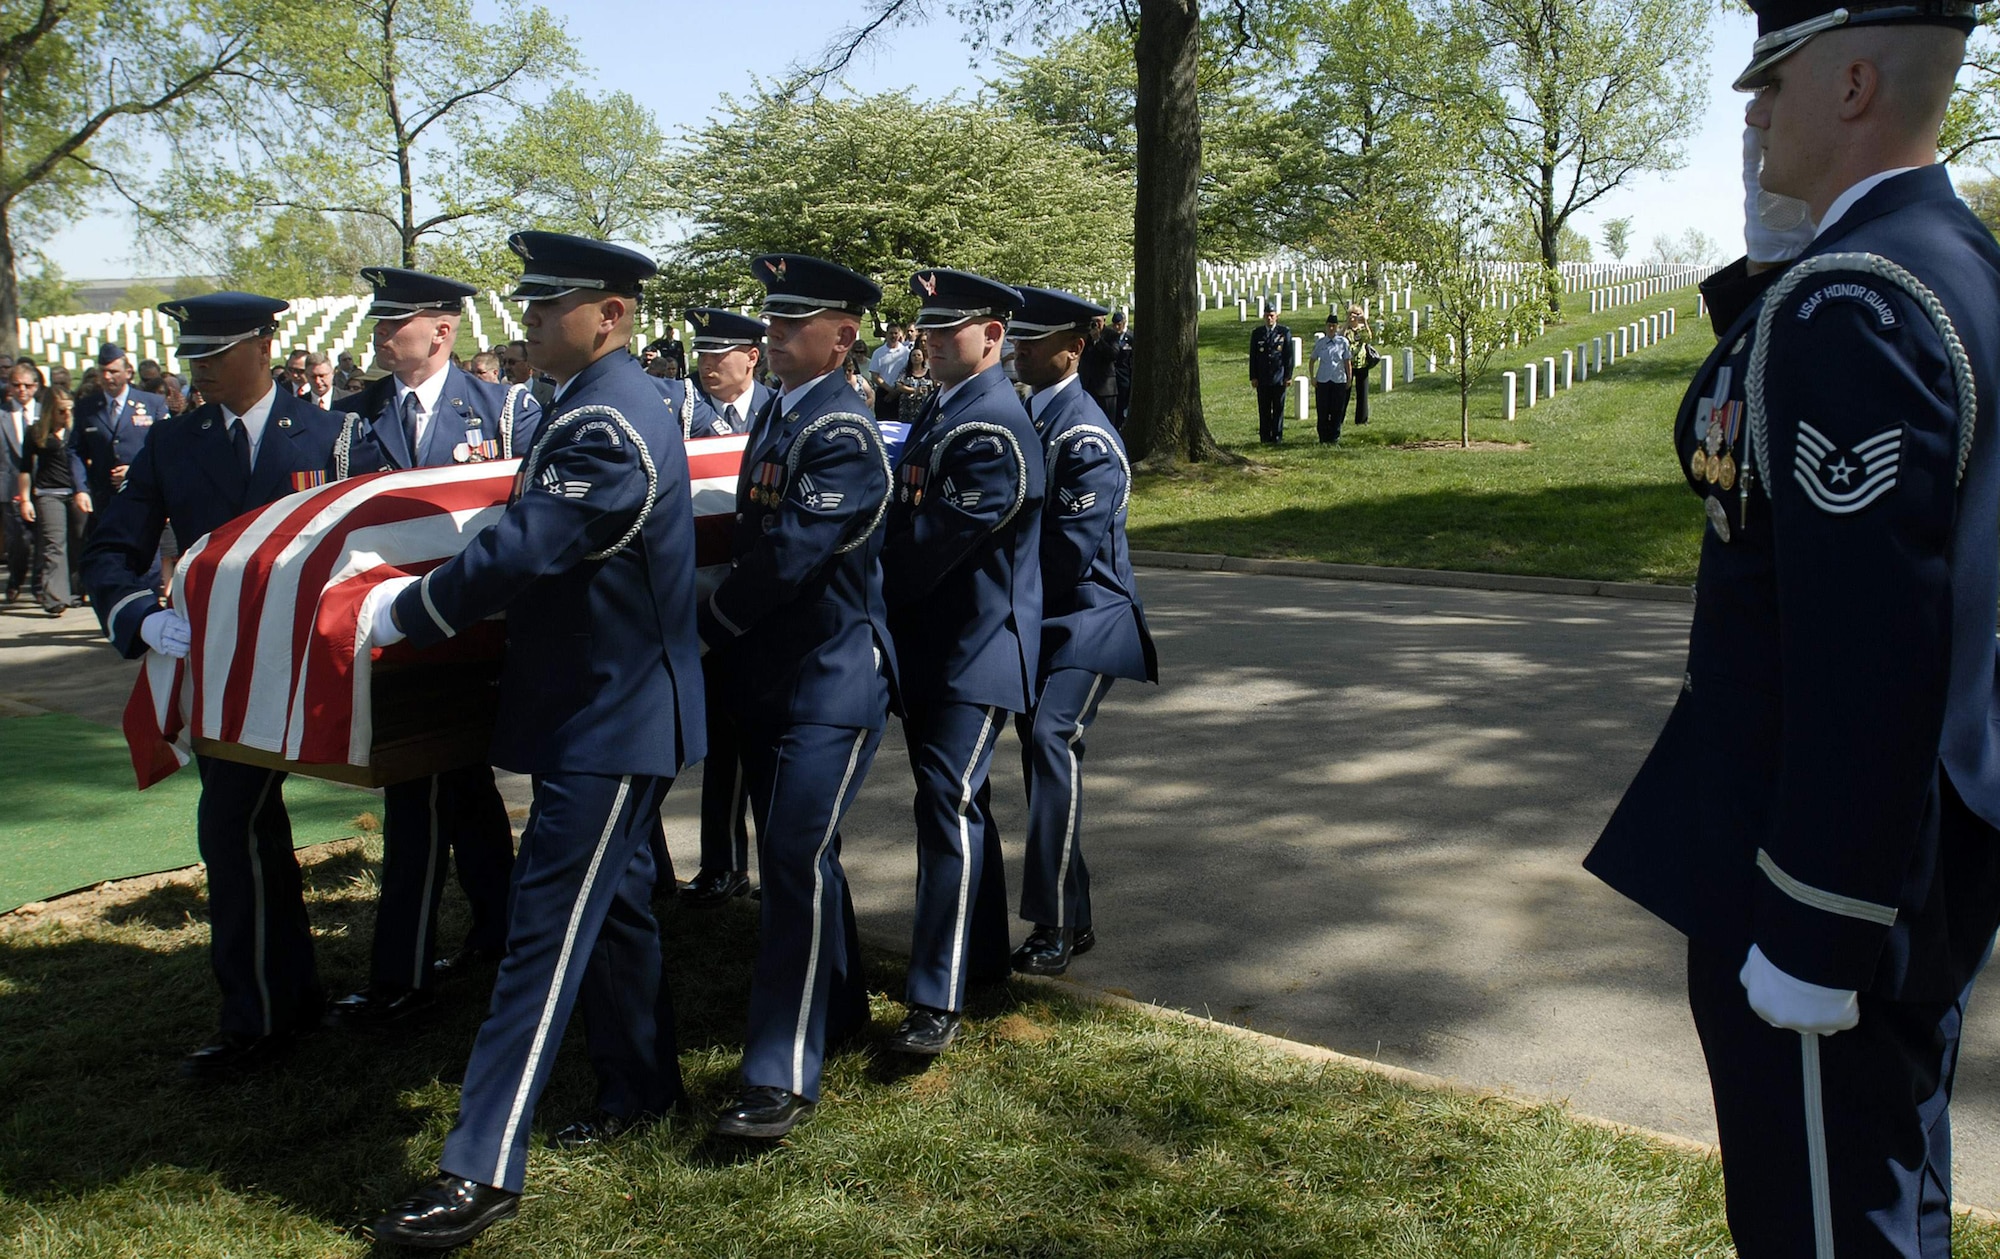 Rifle or '21 gun' salutes not banned from military funerals